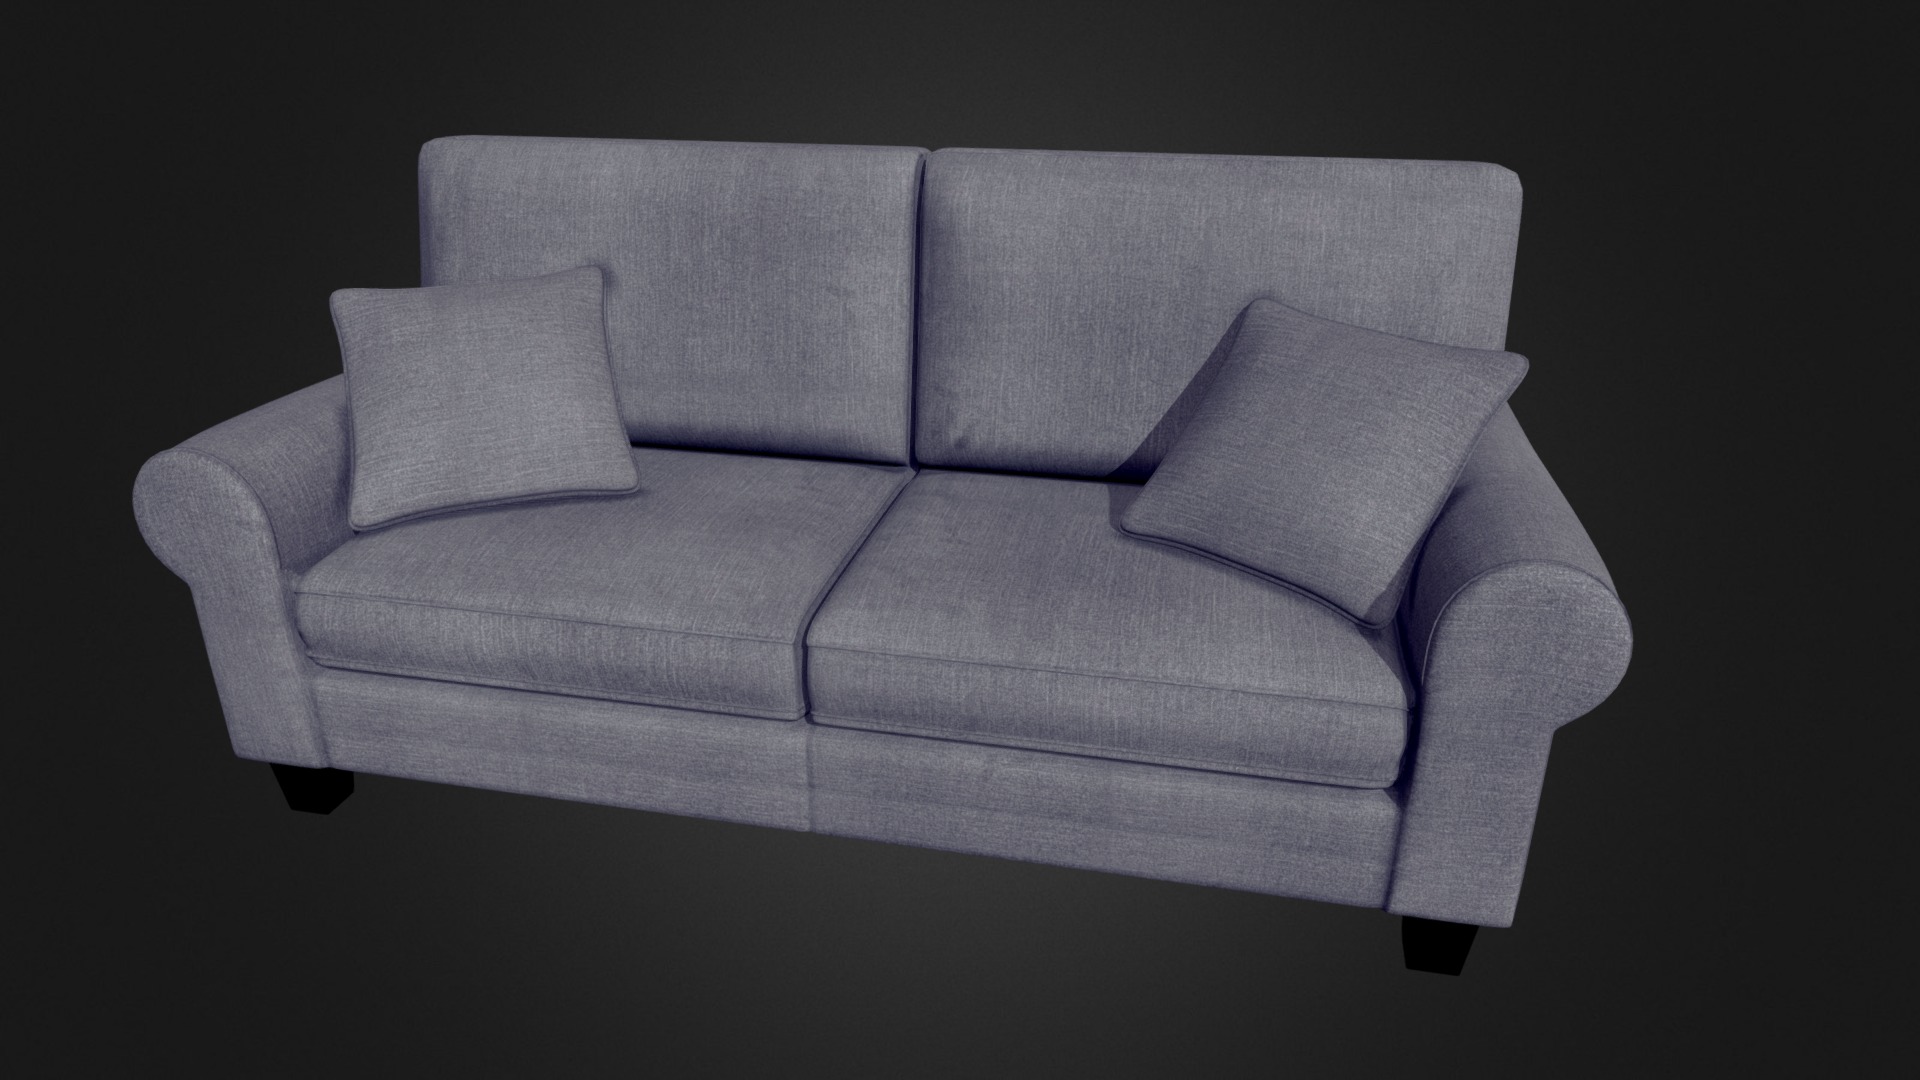 3D model sofa – buxton 73 rolled arm - This is a 3D model of the sofa - buxton 73 rolled arm. The 3D model is about a couch with pillows.